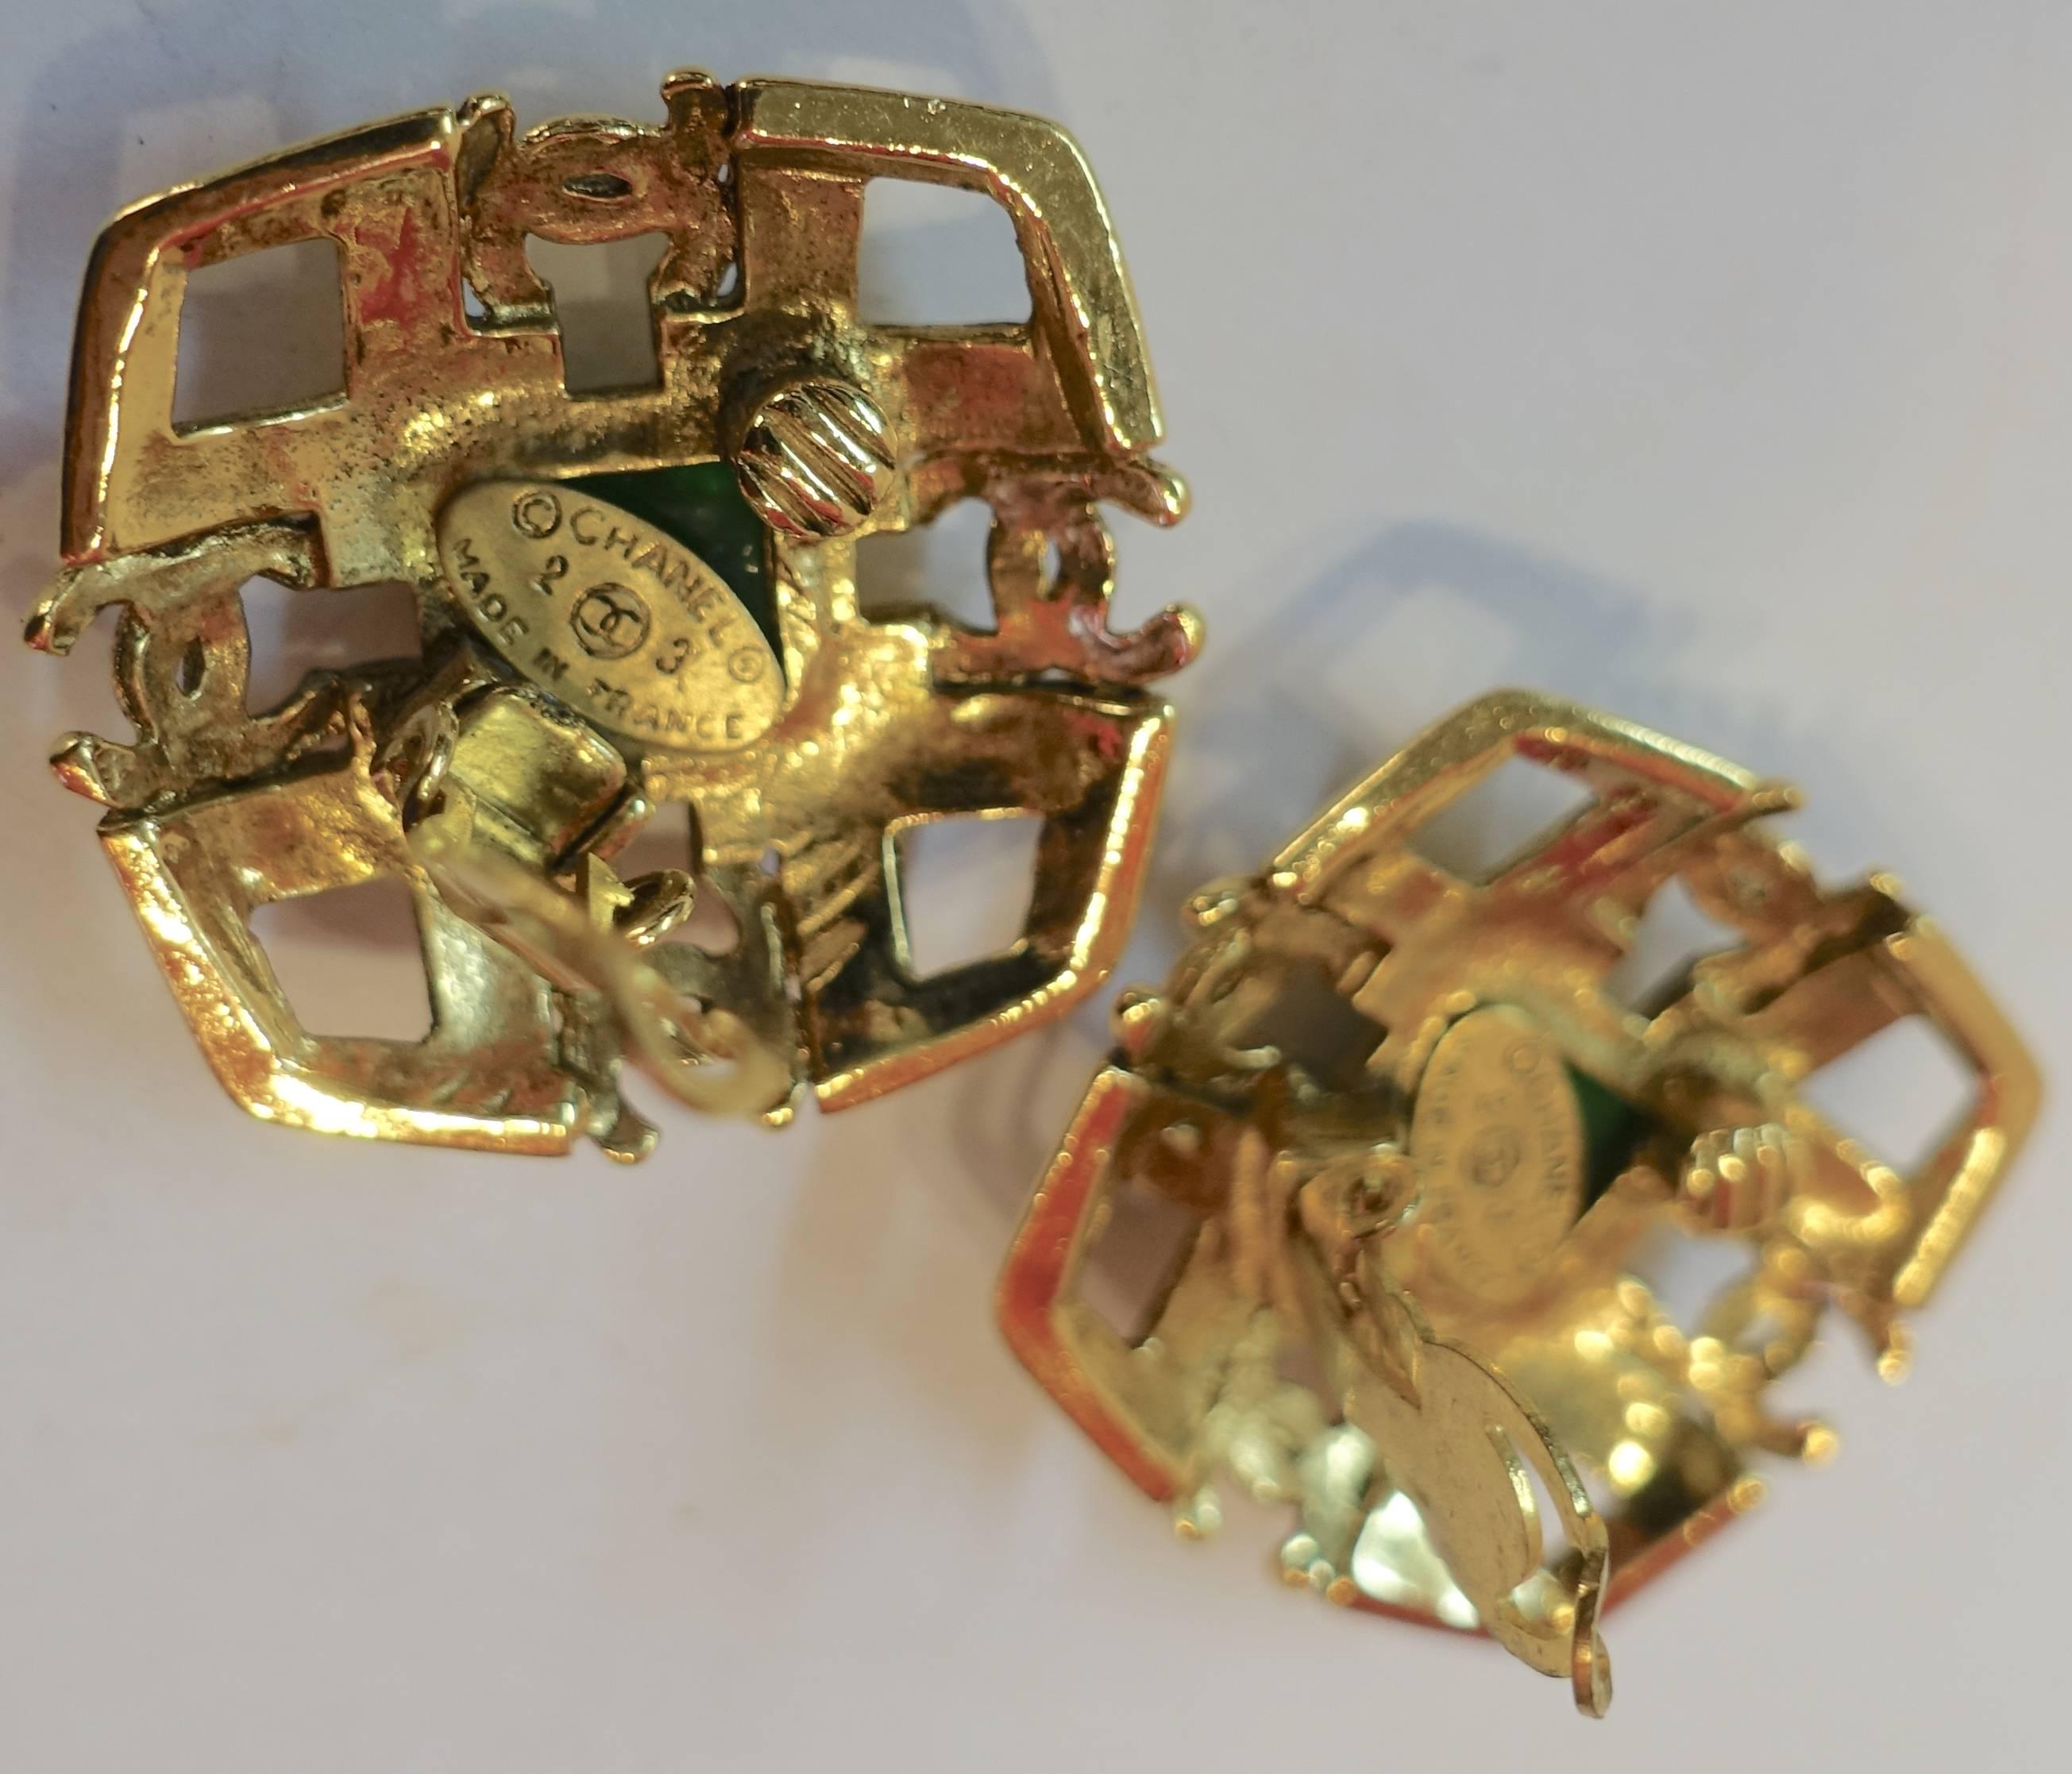 These vintage clip Chanel earrings are from season 23.  They are different and elegant.  It has a square open work design with the double Cs on each side.  The center has the old green Gripoix center.  It has a gold plated tone metal finish and are